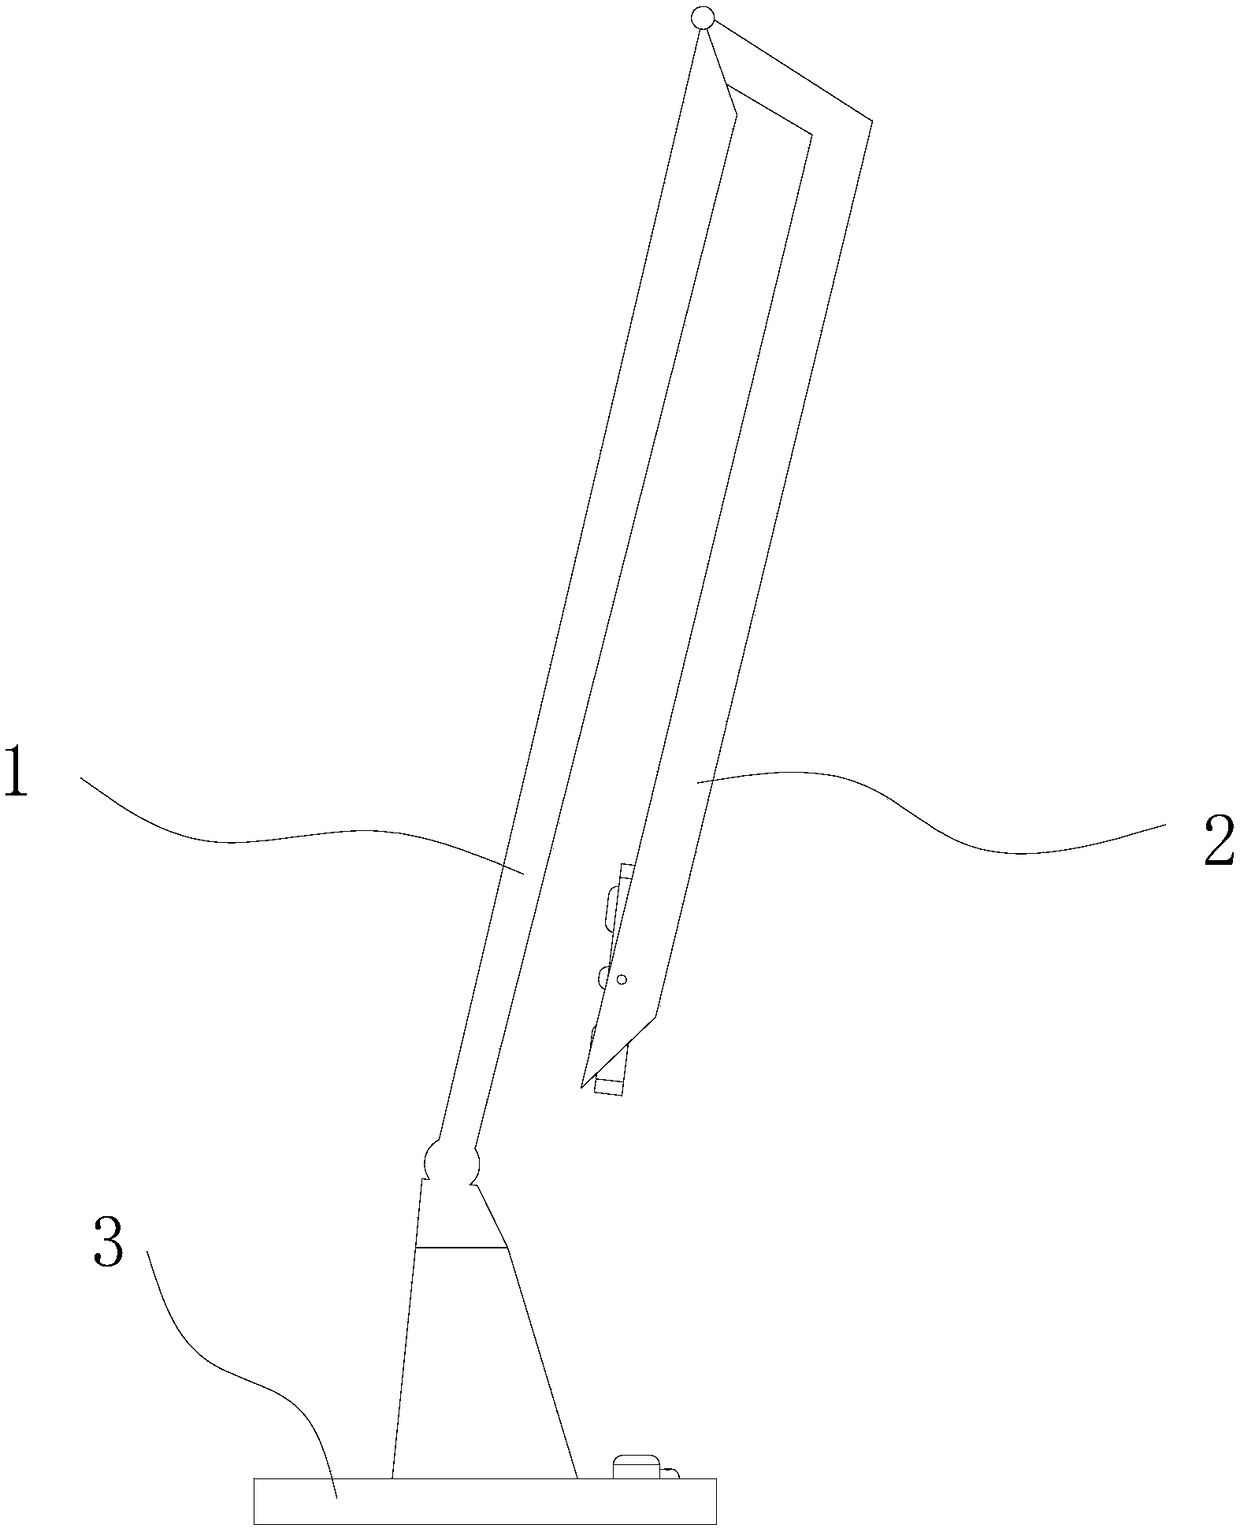 A cardiopulmonary resuscitation assisting device and a compression depth measurement method